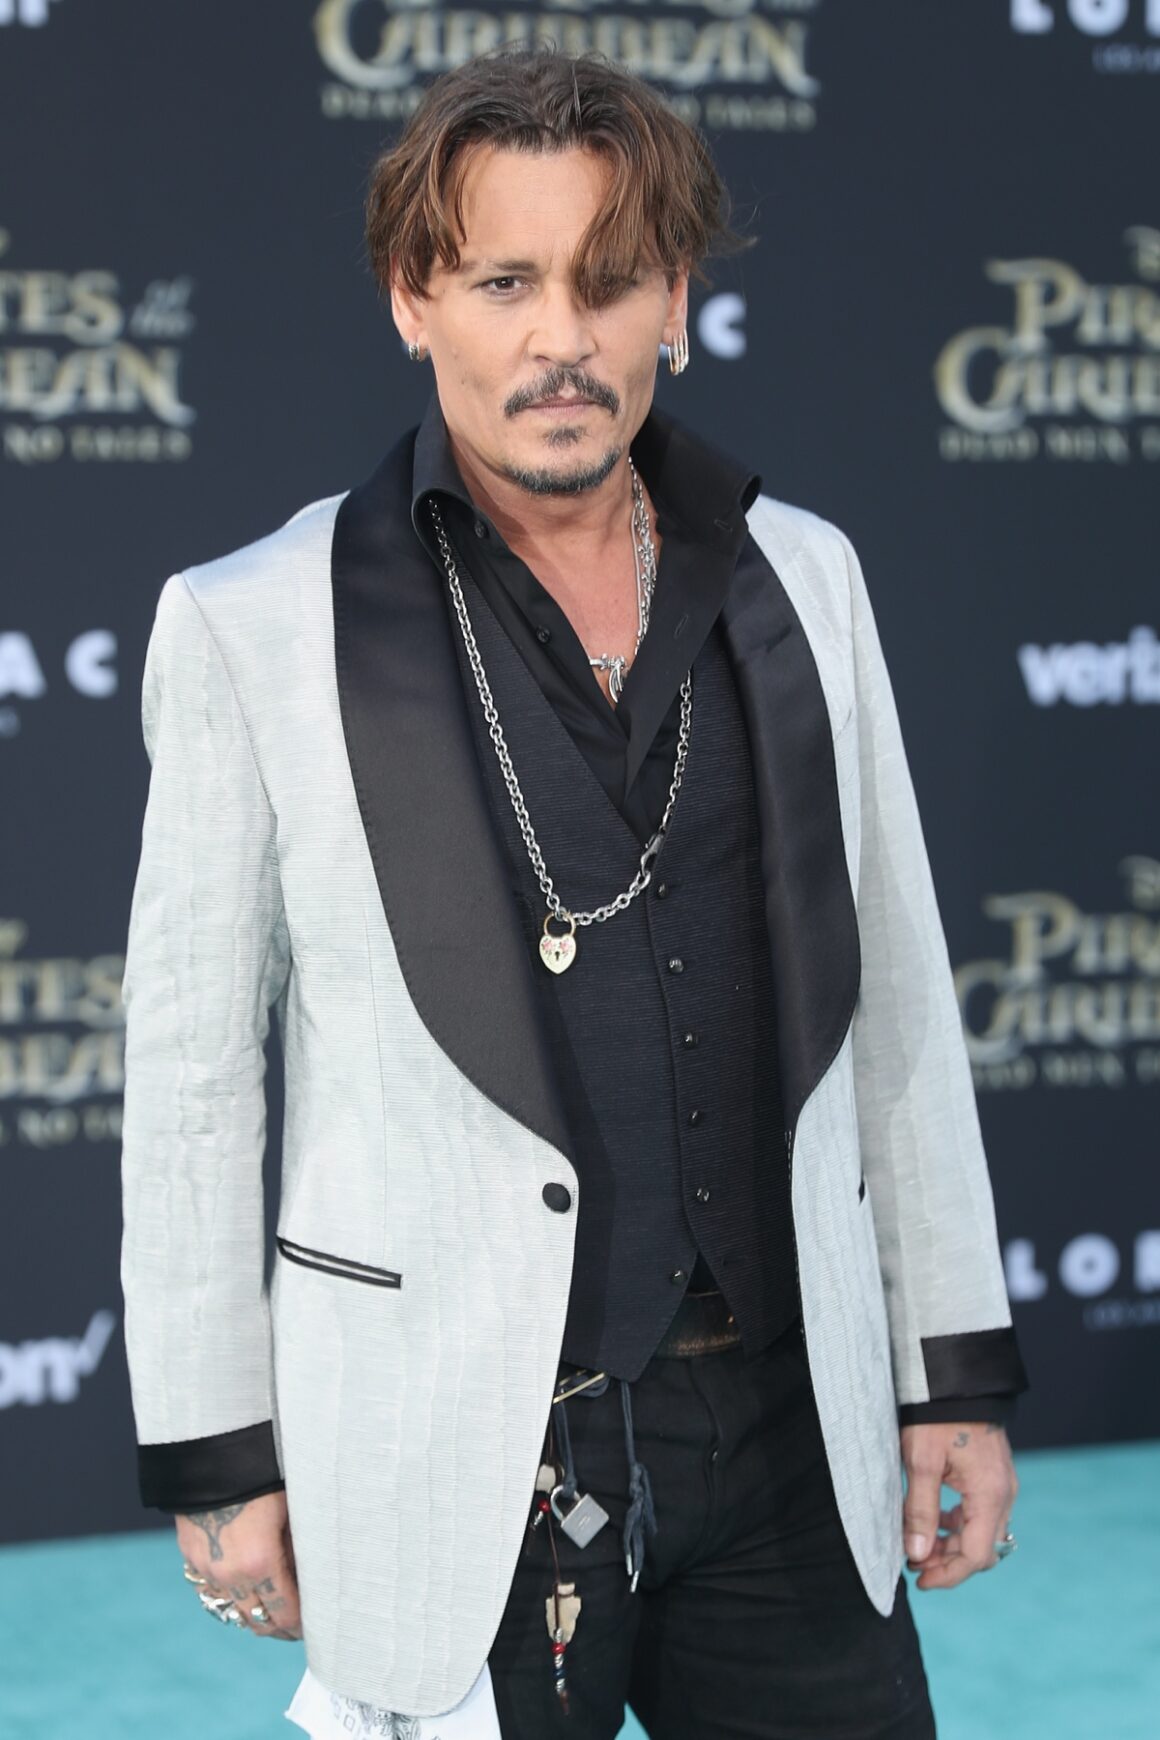 Johnny Depp Premiere Of Disney's And Jerry Bruckheimer Films' "Pirates Of The Caribbean: Dead Men Tell No Tales"